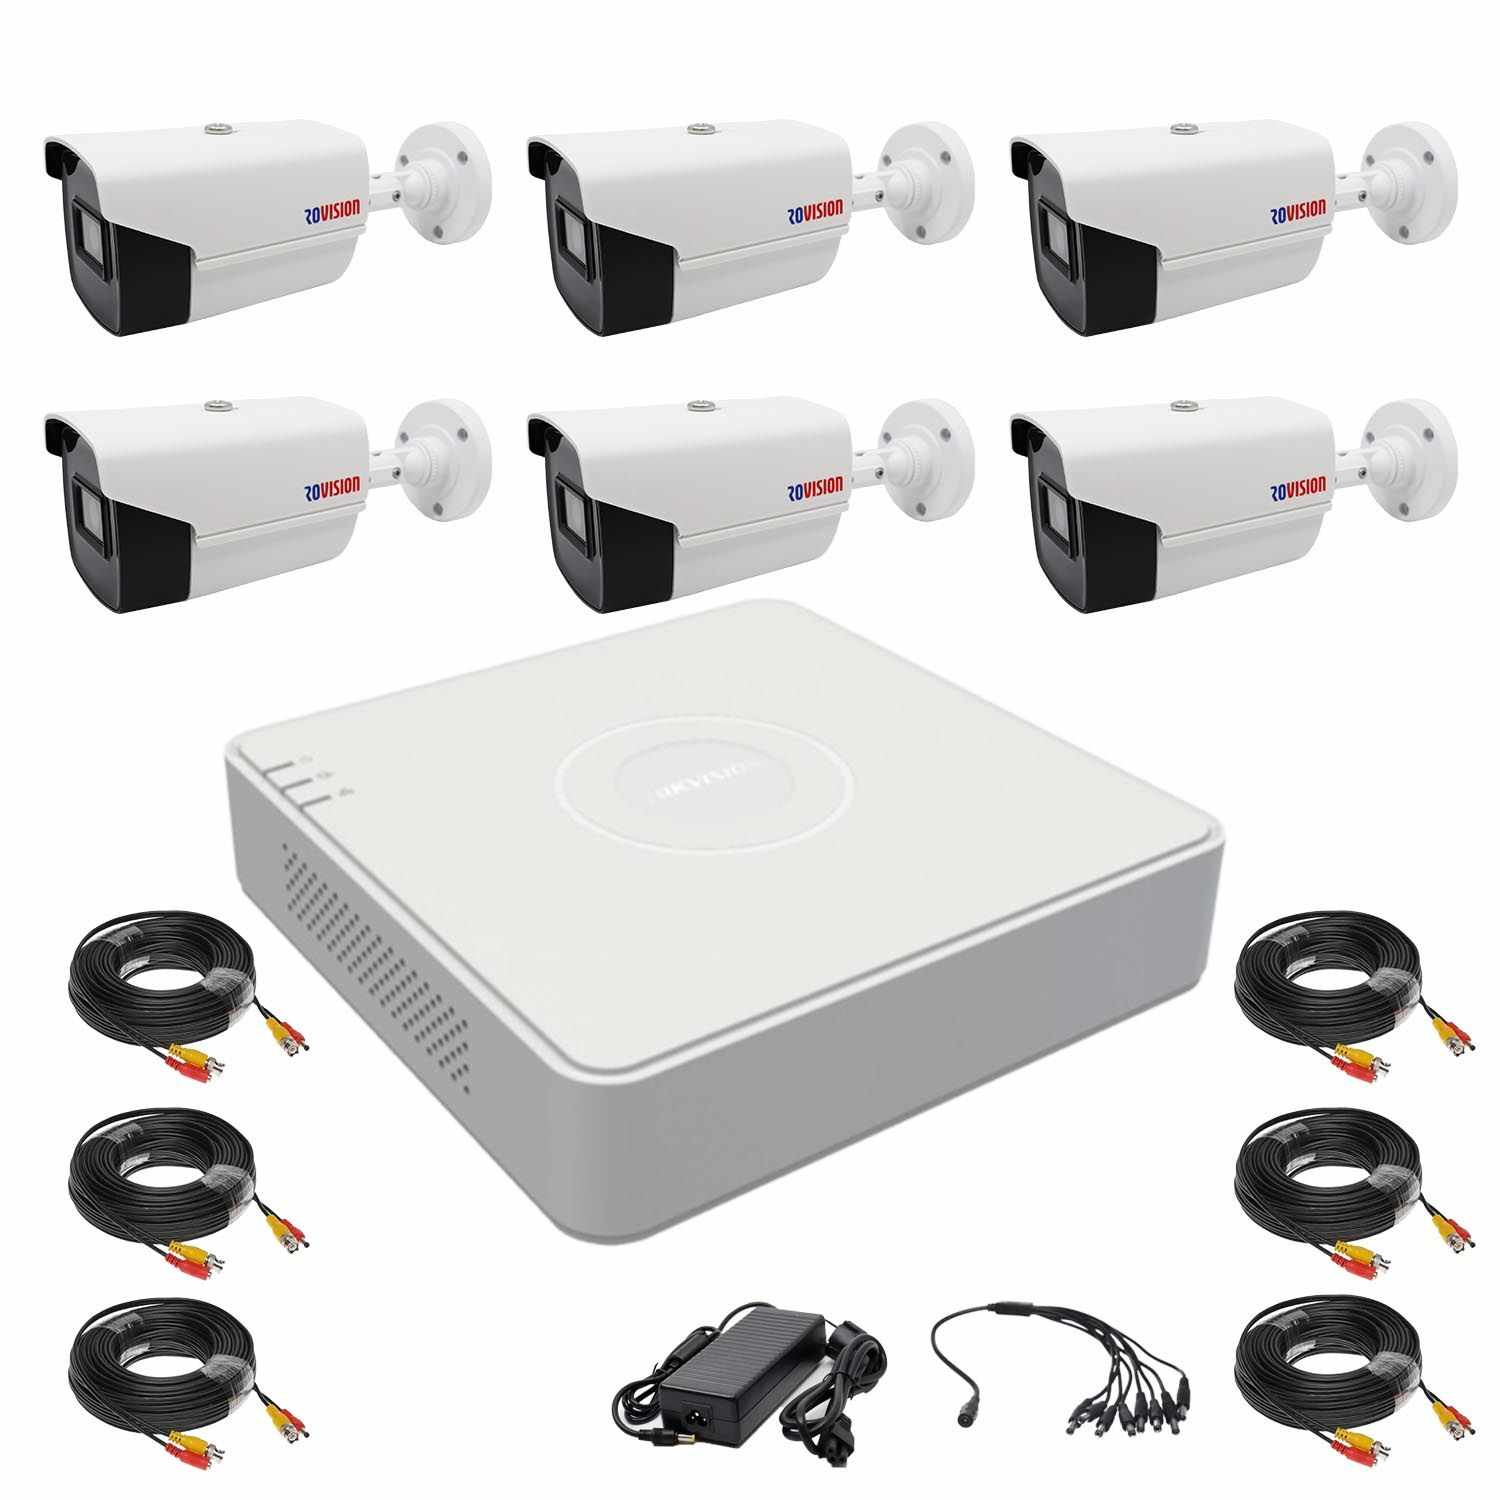 Sistem supraveghere 6 camere Rovision oem Hikvision 2MP full hd, DVR 8 canale, accesorii incluse